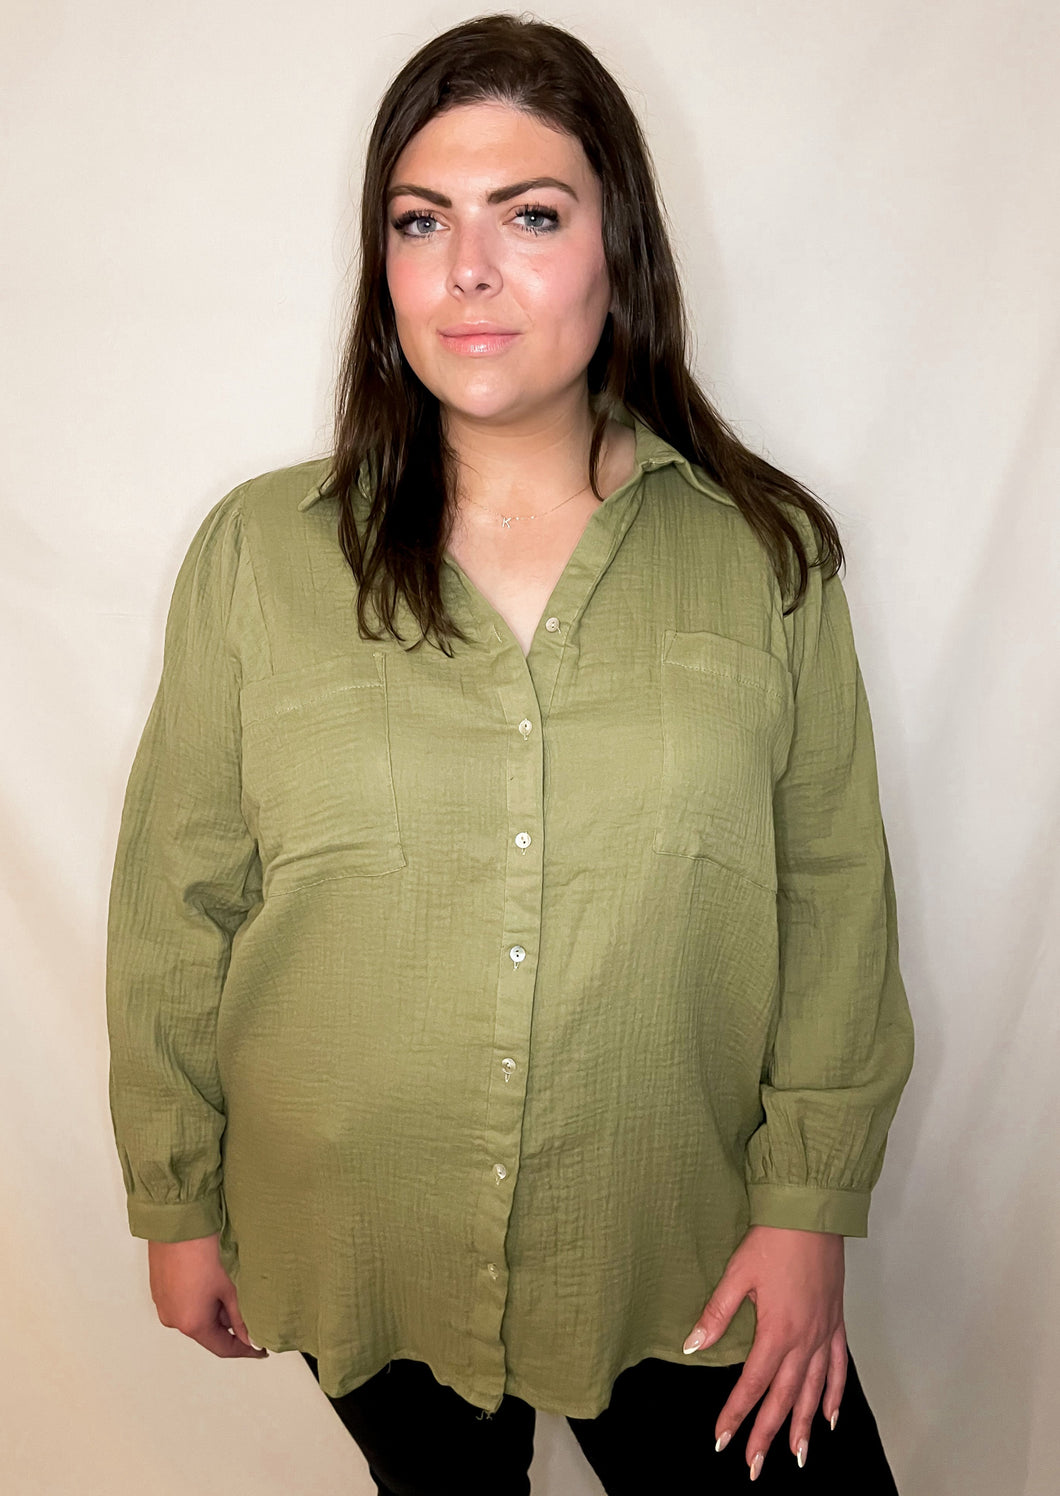 Curvy - Green with Envy Top